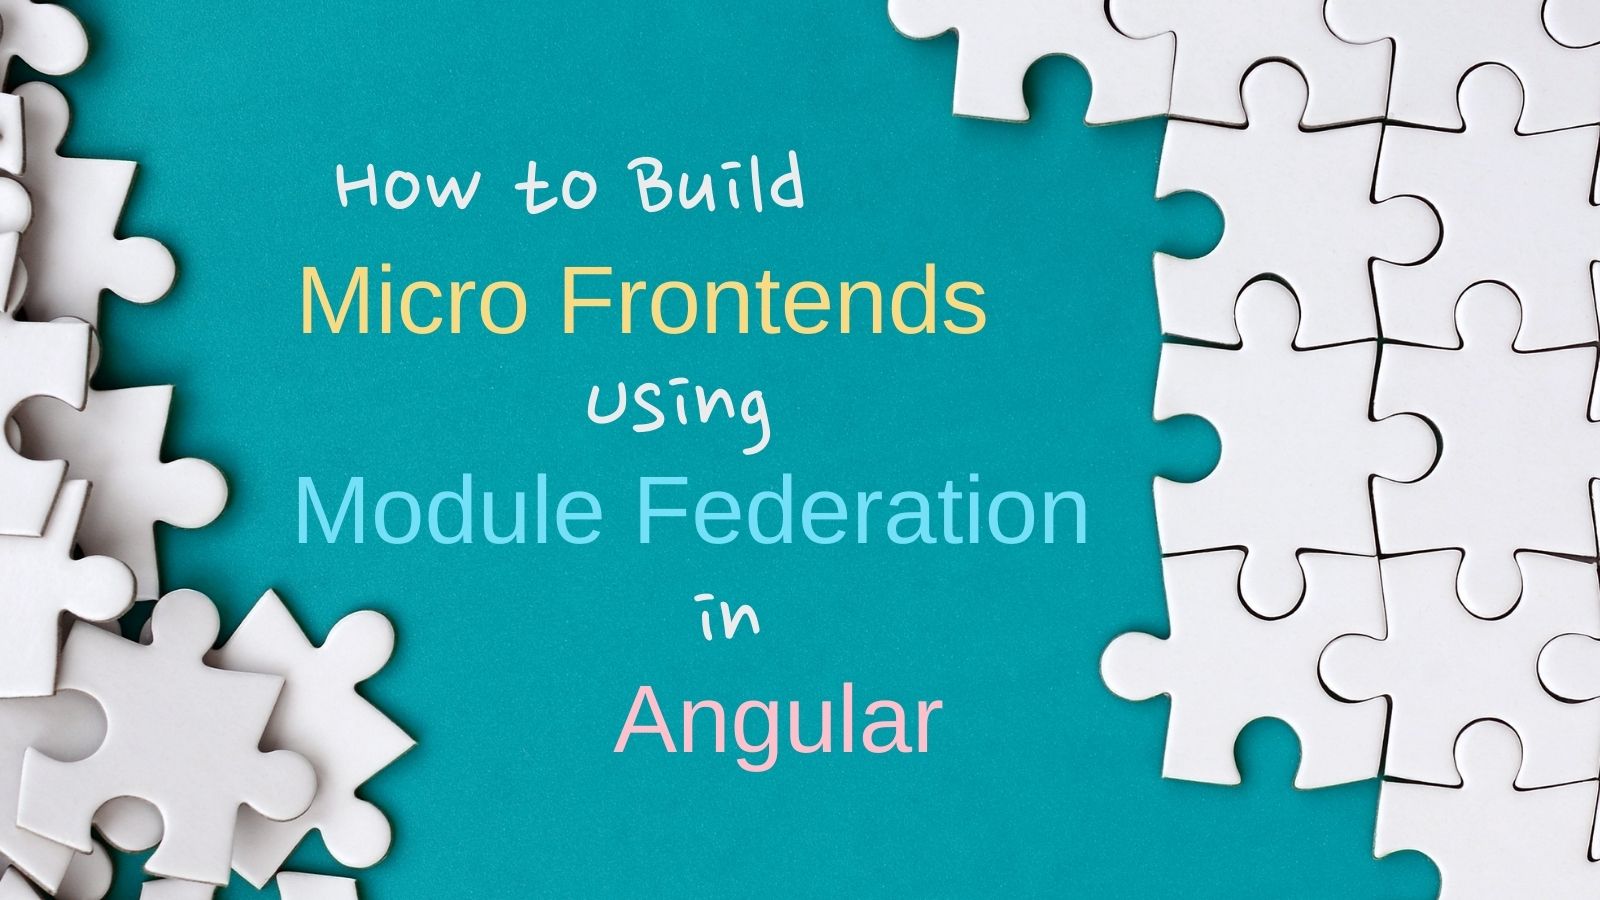 How to Build Micro Frontends Using Module Federation in Angular